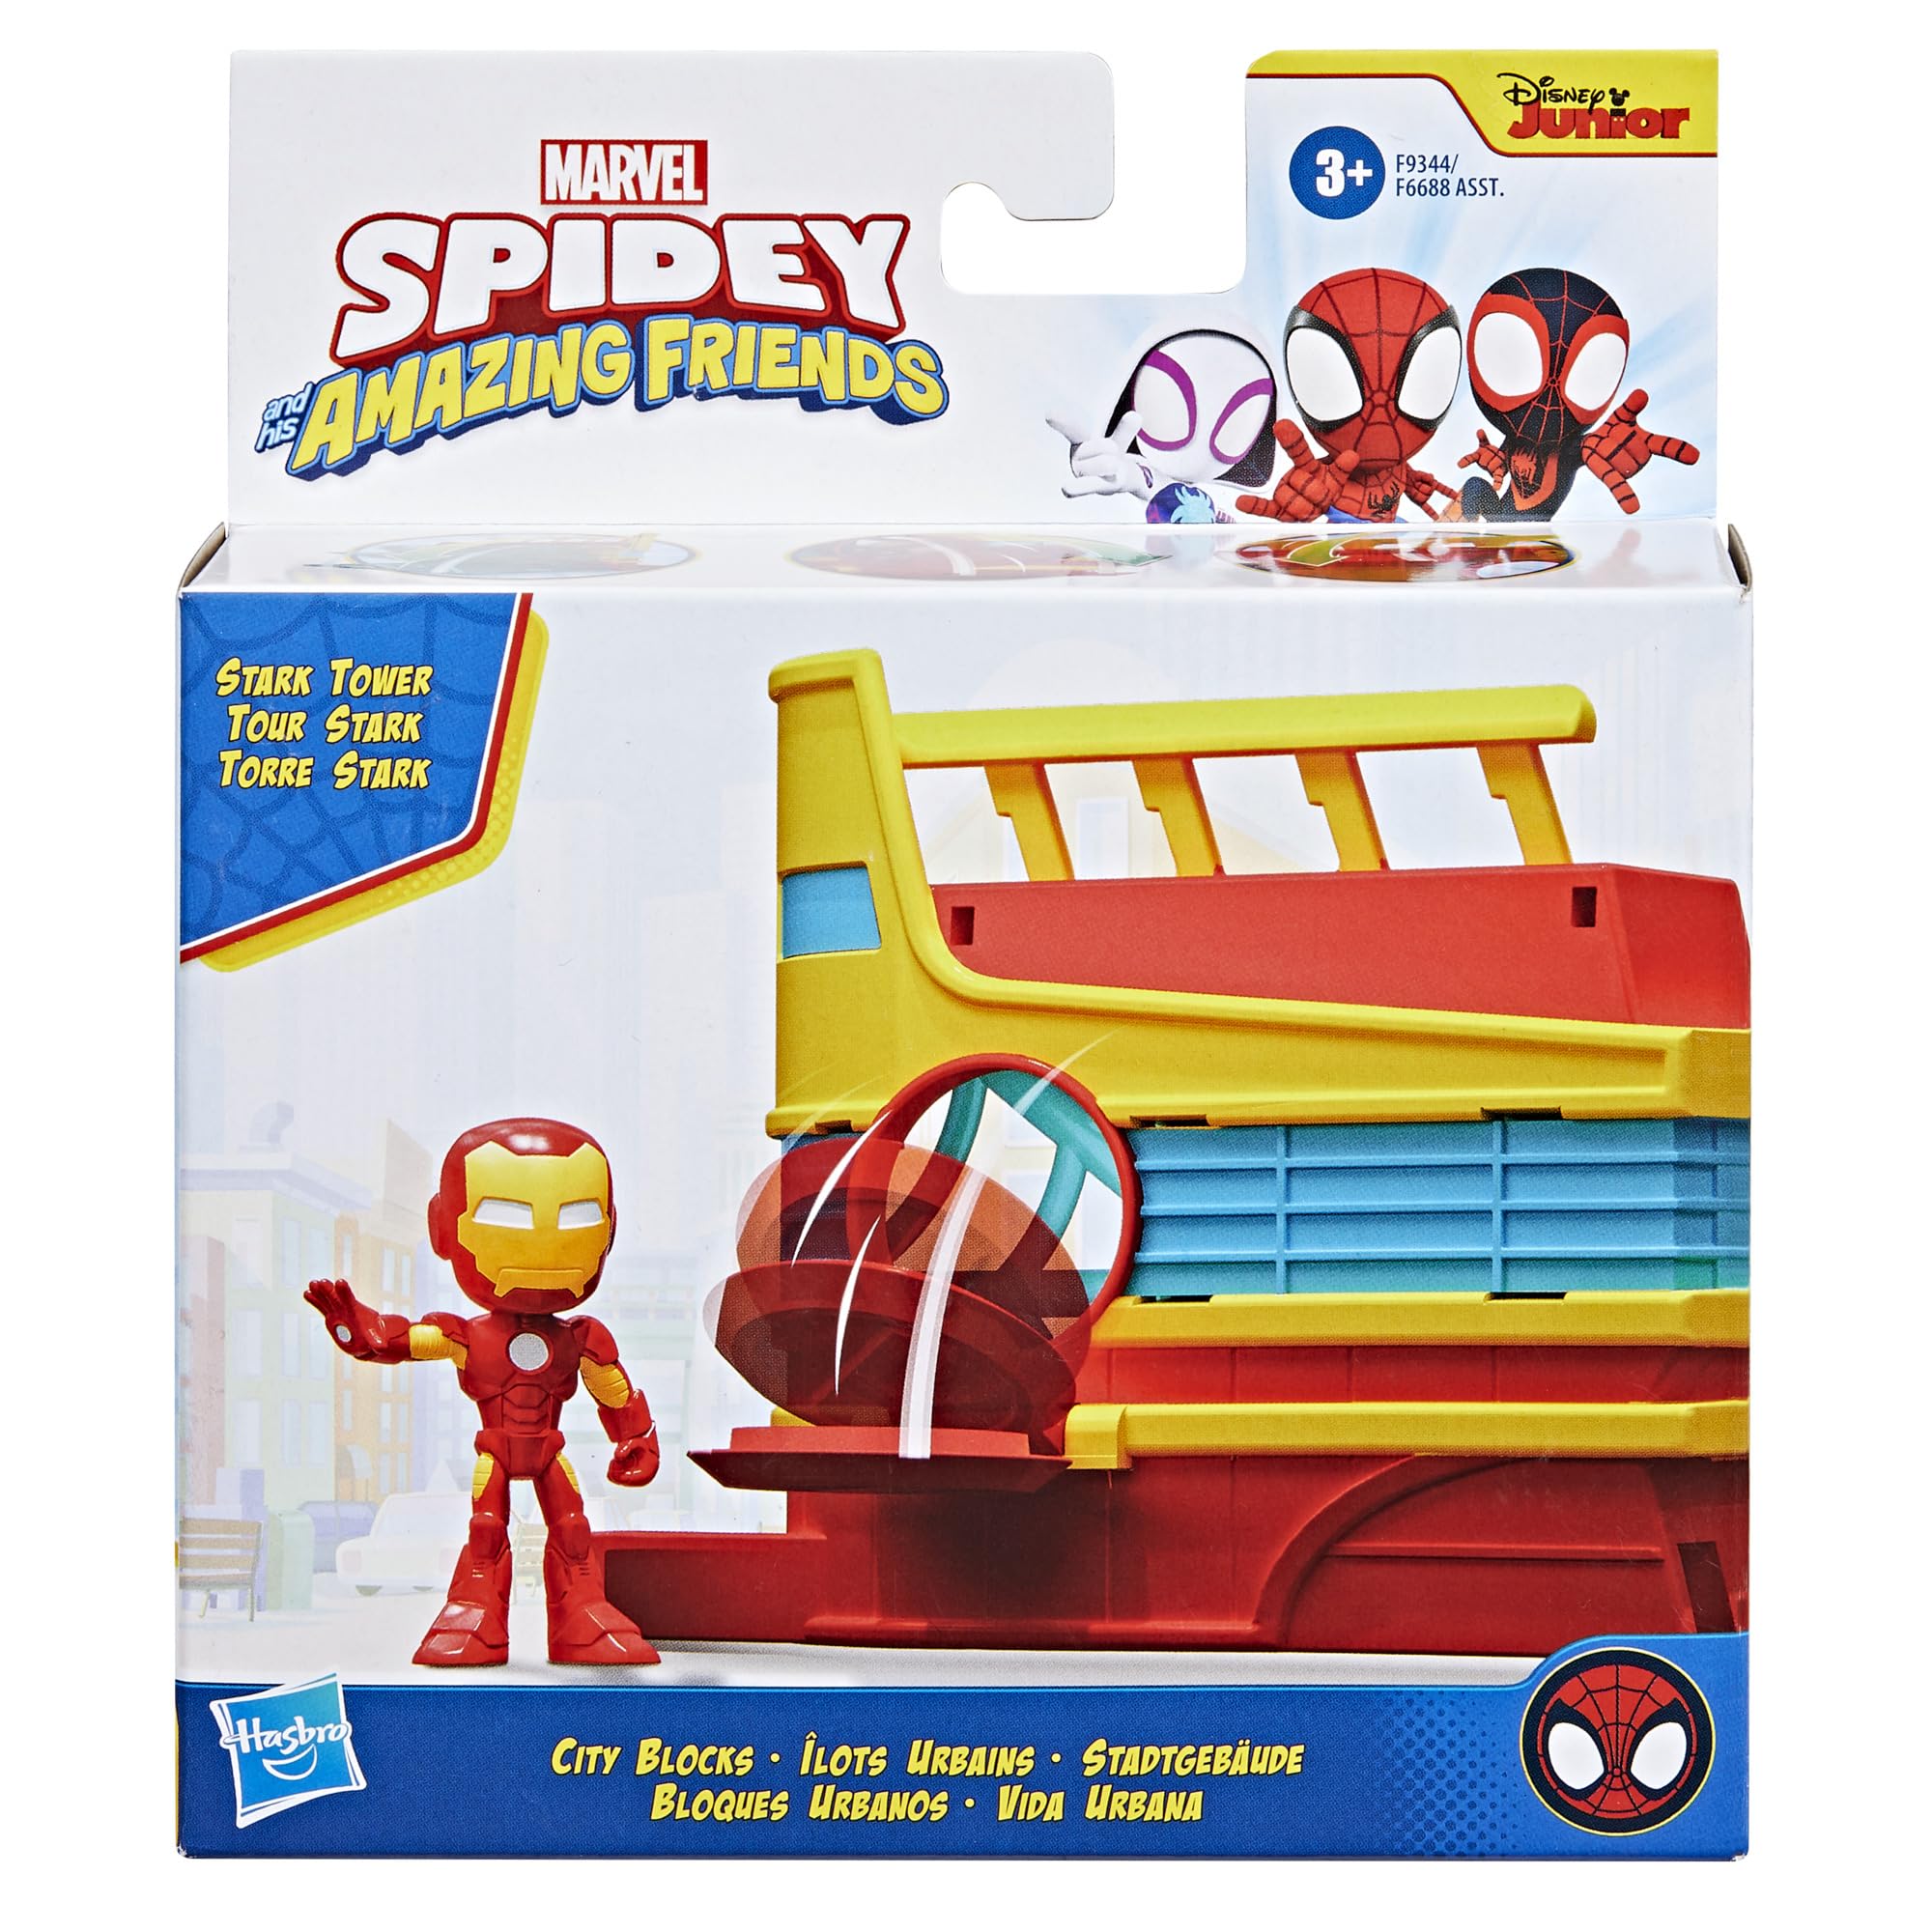 Spidey and His Amazing Friends City Blocks Stark Tower Playset with Action Figure, Marvel Super Hero Toys for Kids 3 and Up